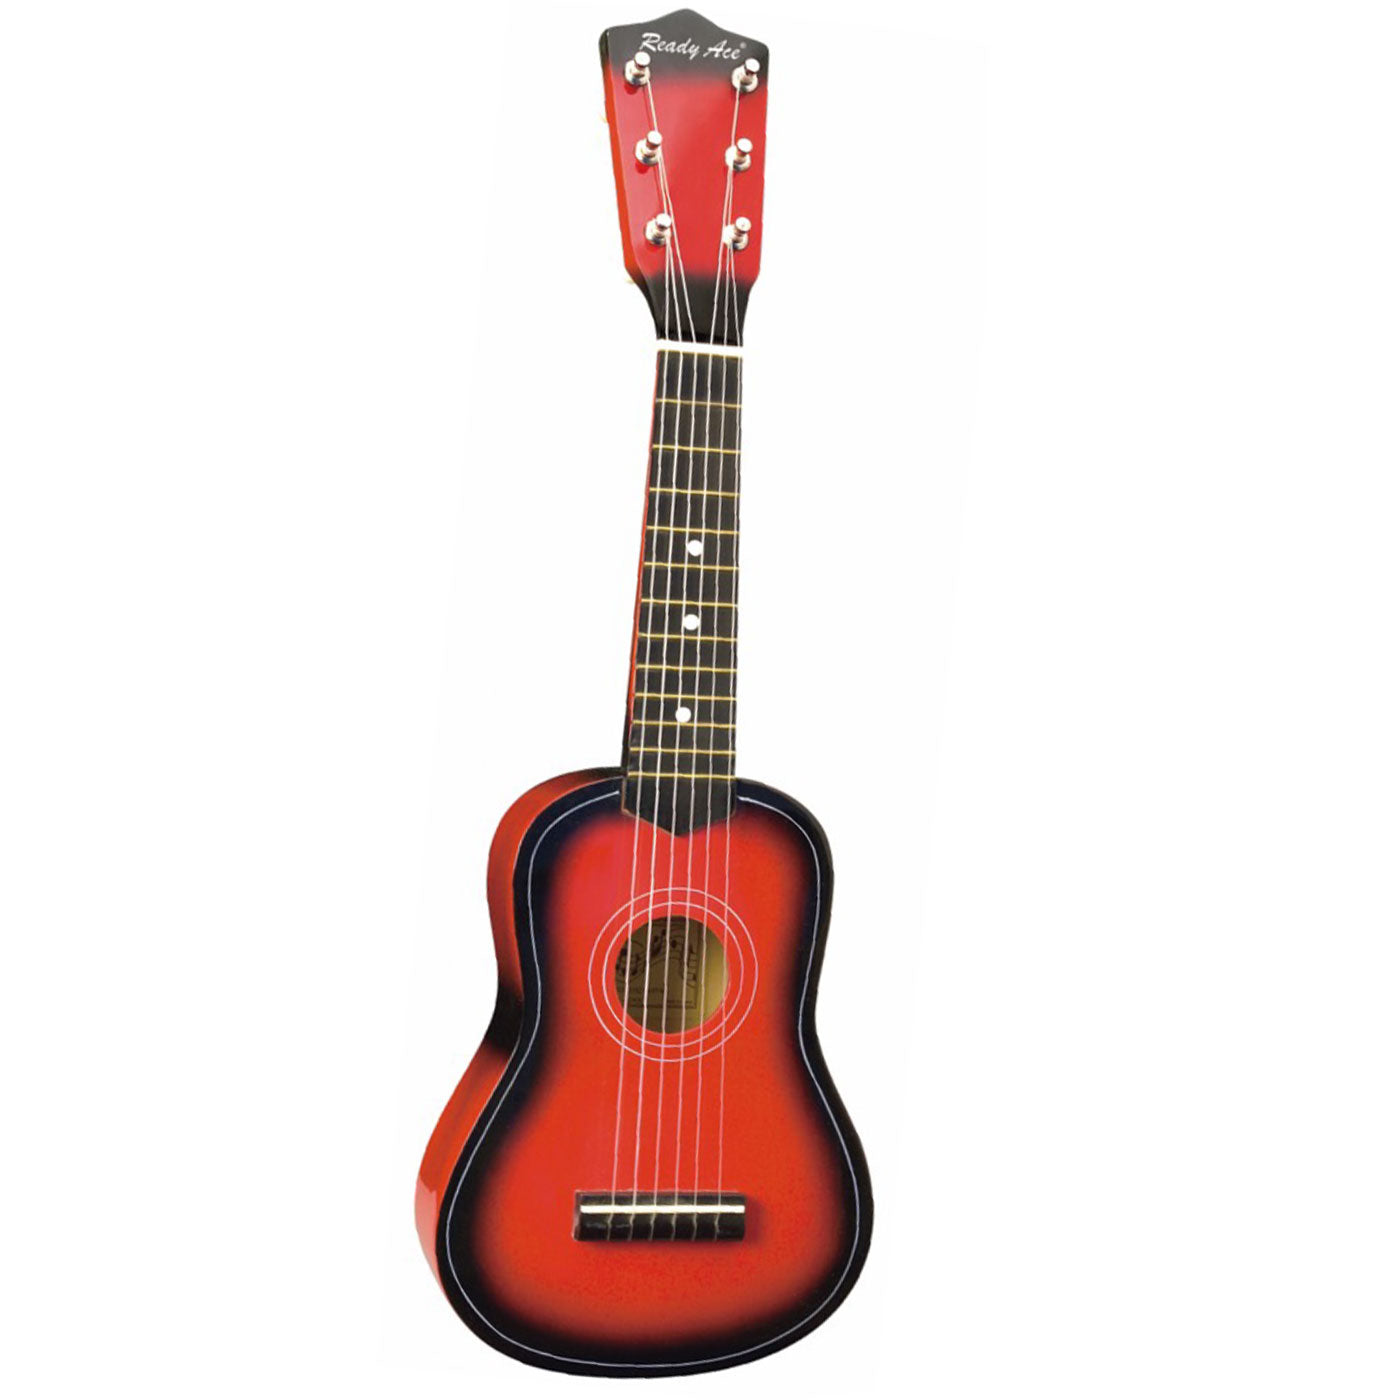 Ready Ace Mini Wooden Guitar Red 52cm